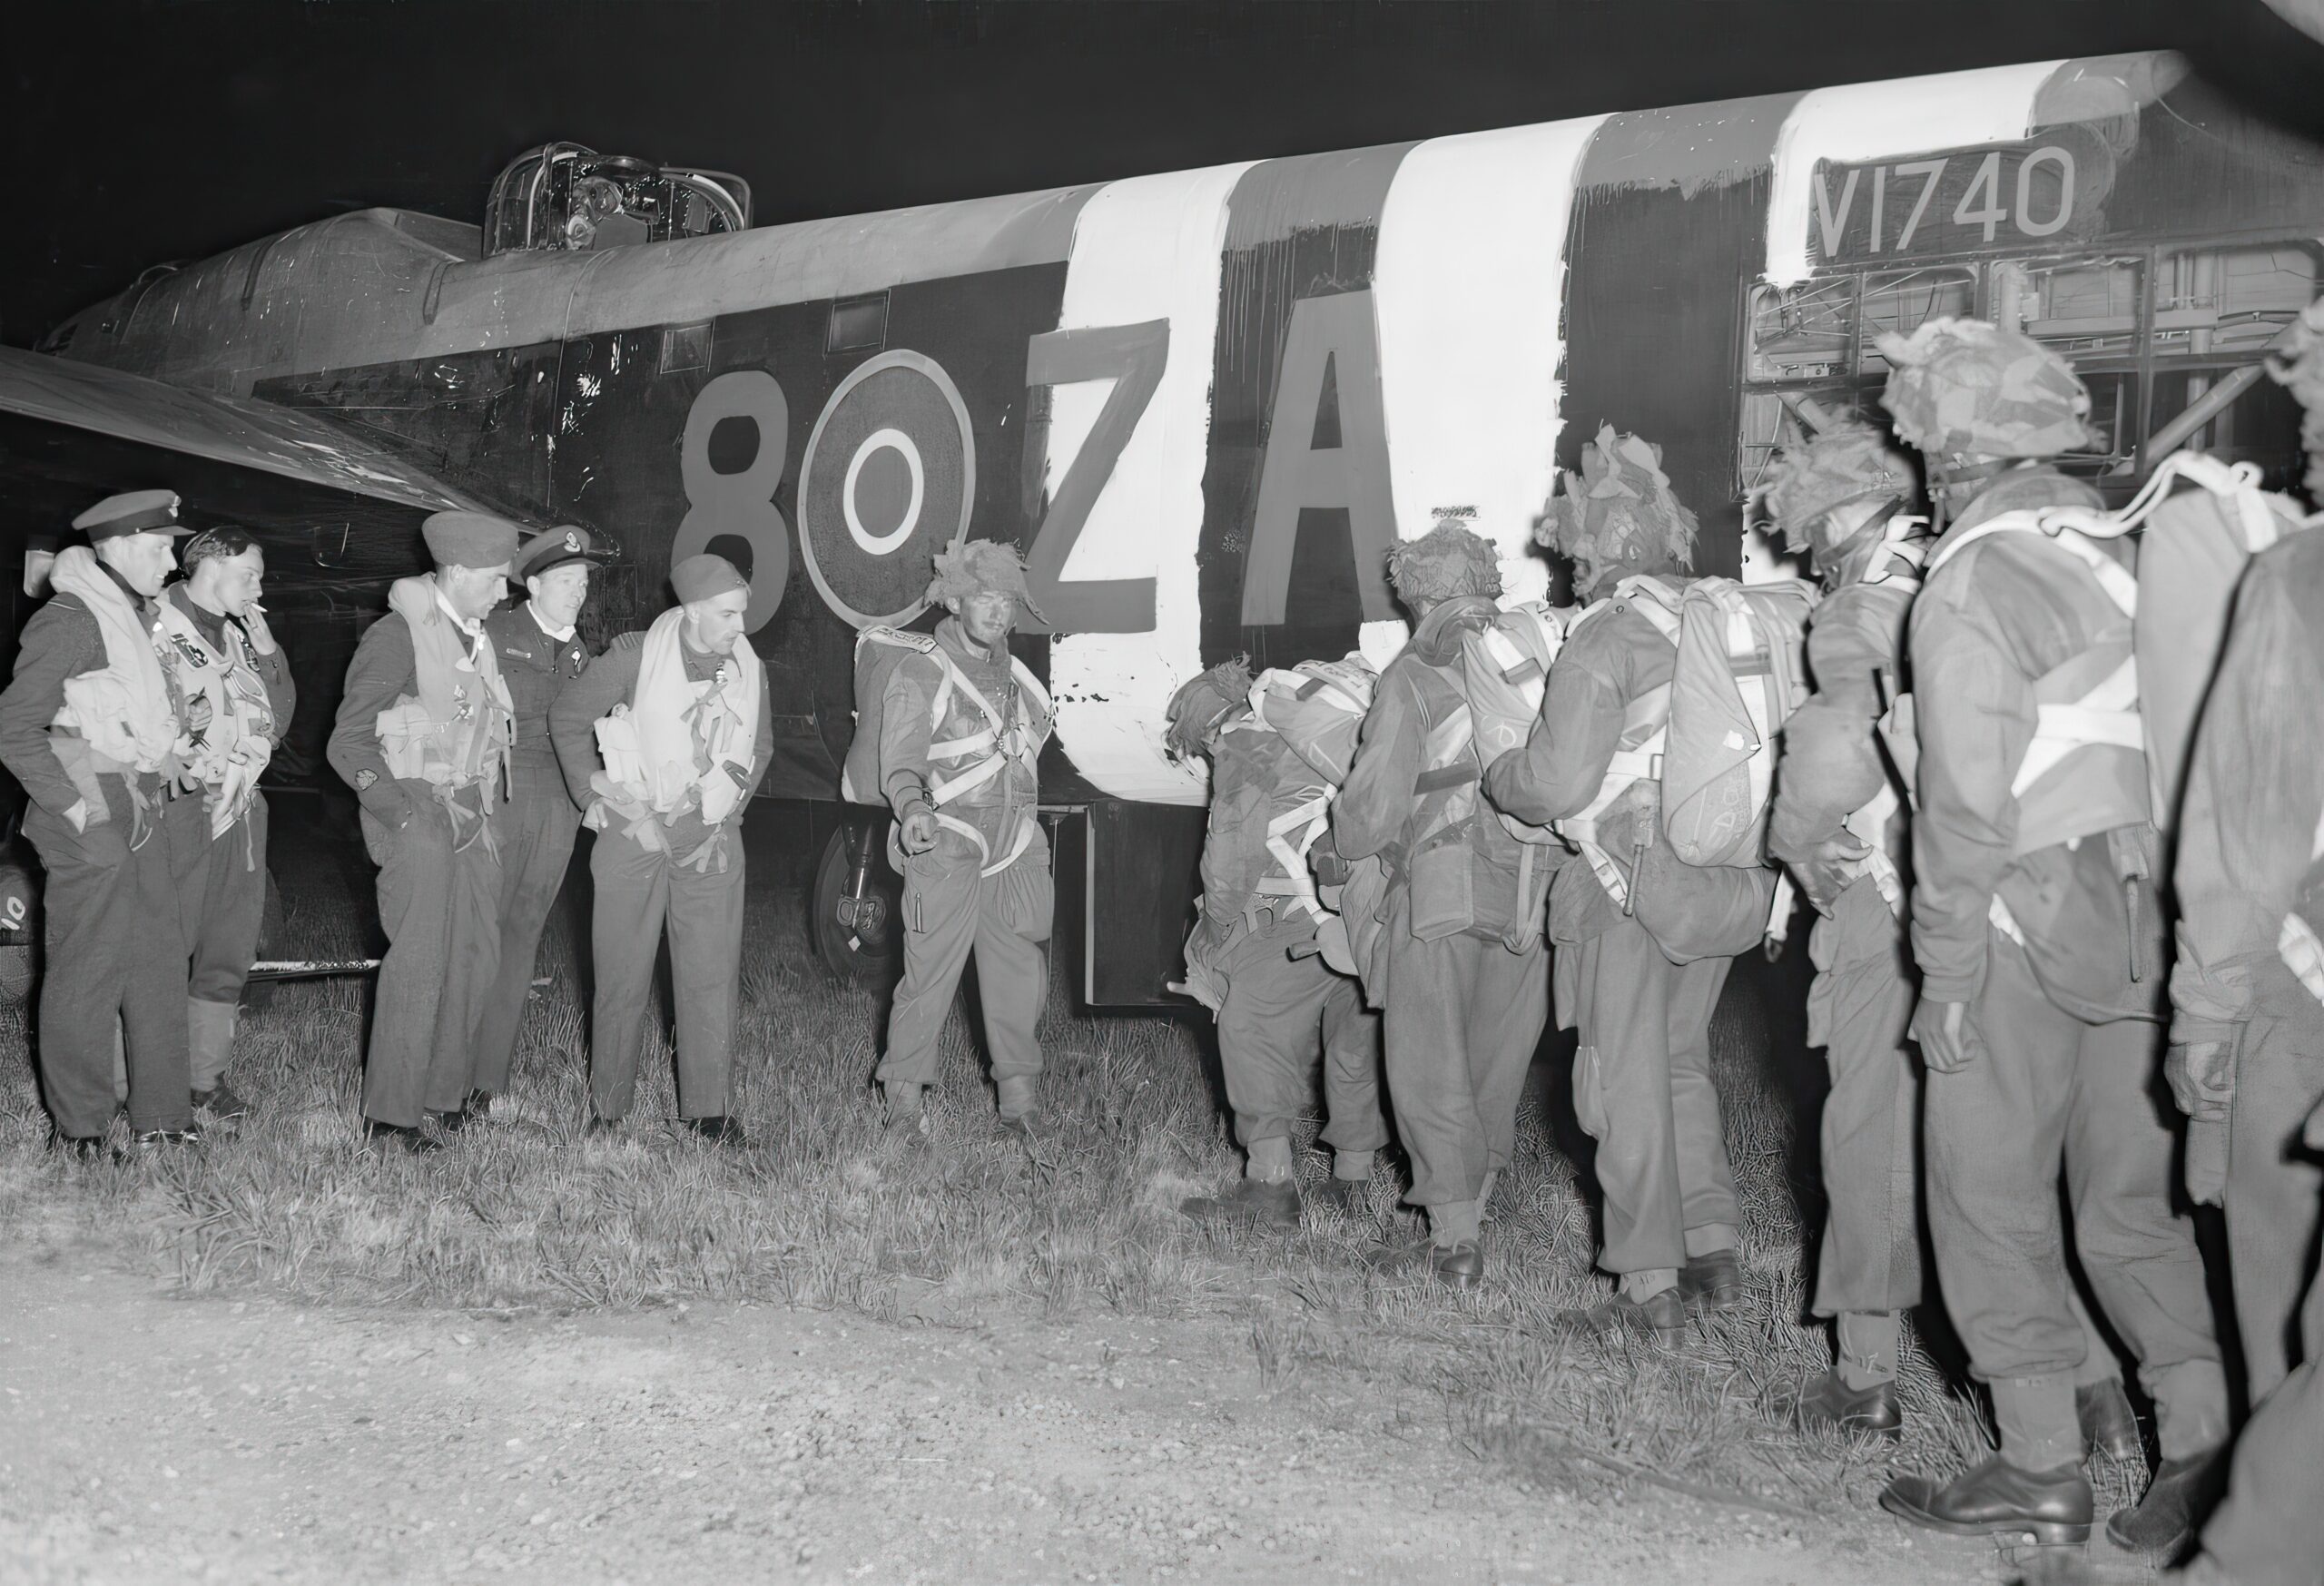 Paratroops of 6th Airborne Division climbing into an RAF Albemarle aircraft at RAF Harwell, June 5 1944